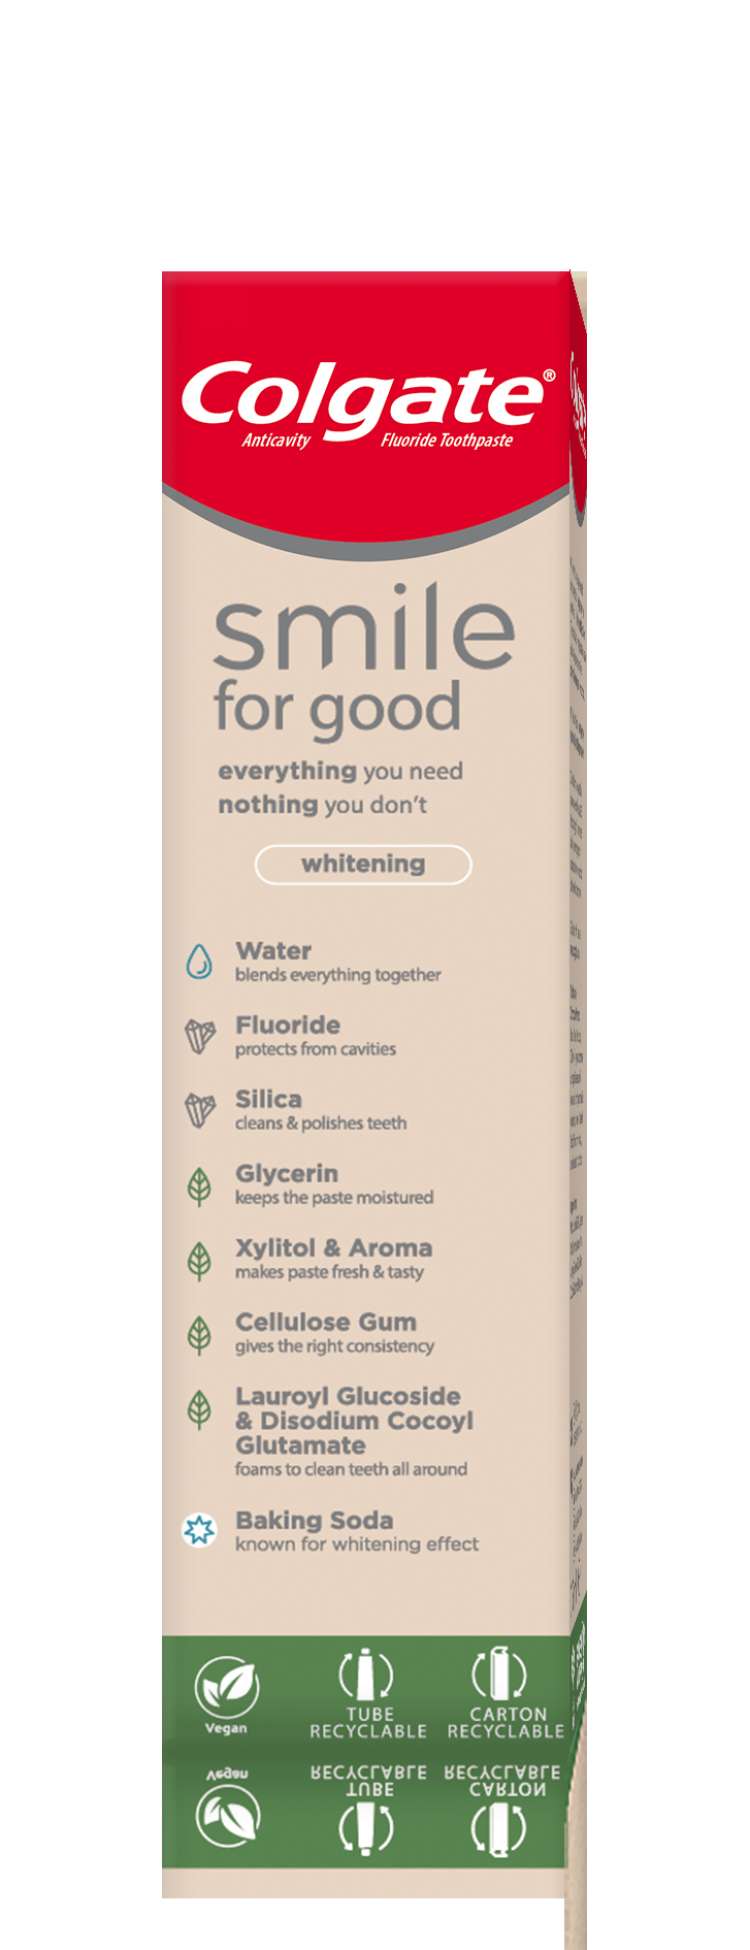 Colgate Smile for Good  whitening.png